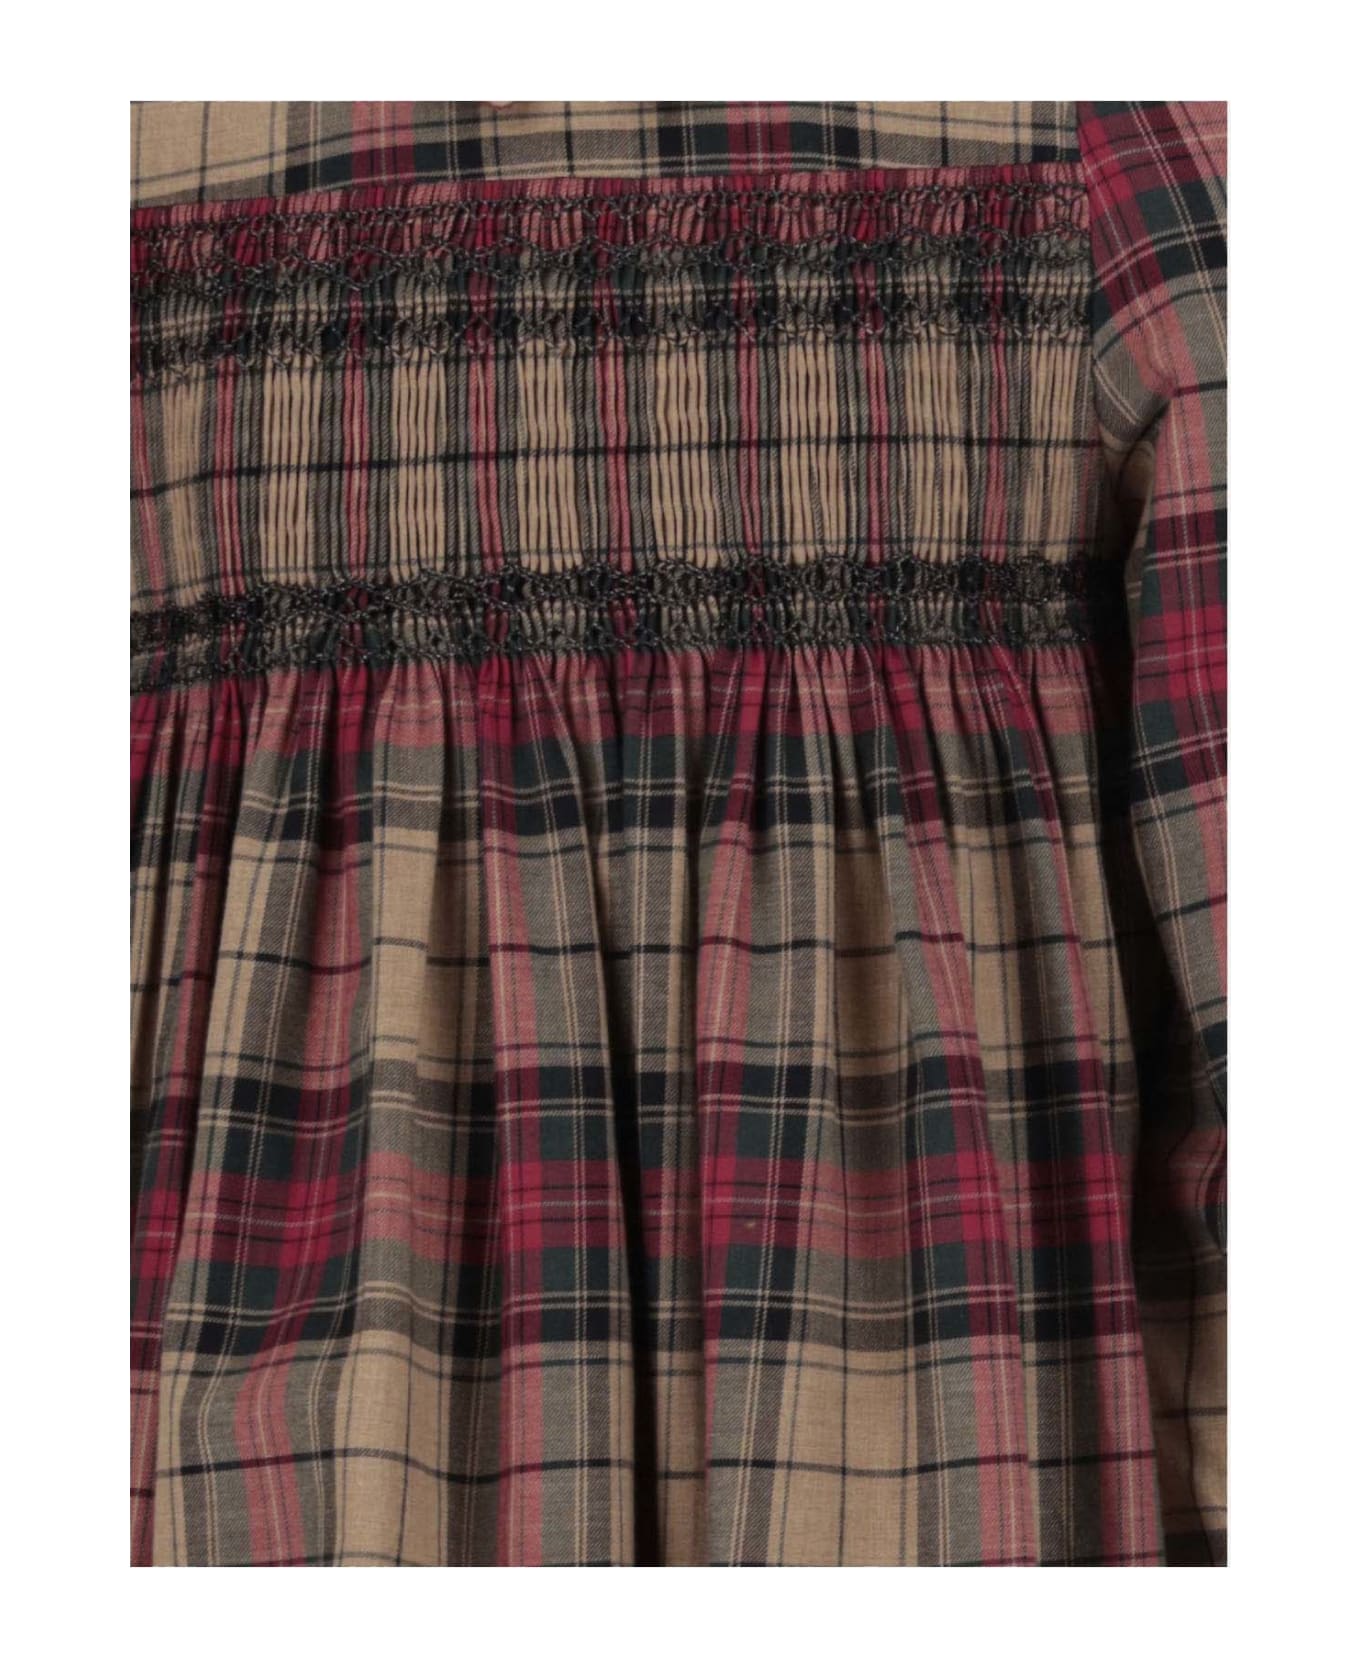 Bonpoint Cotton Dress With Check Pattern - Brown